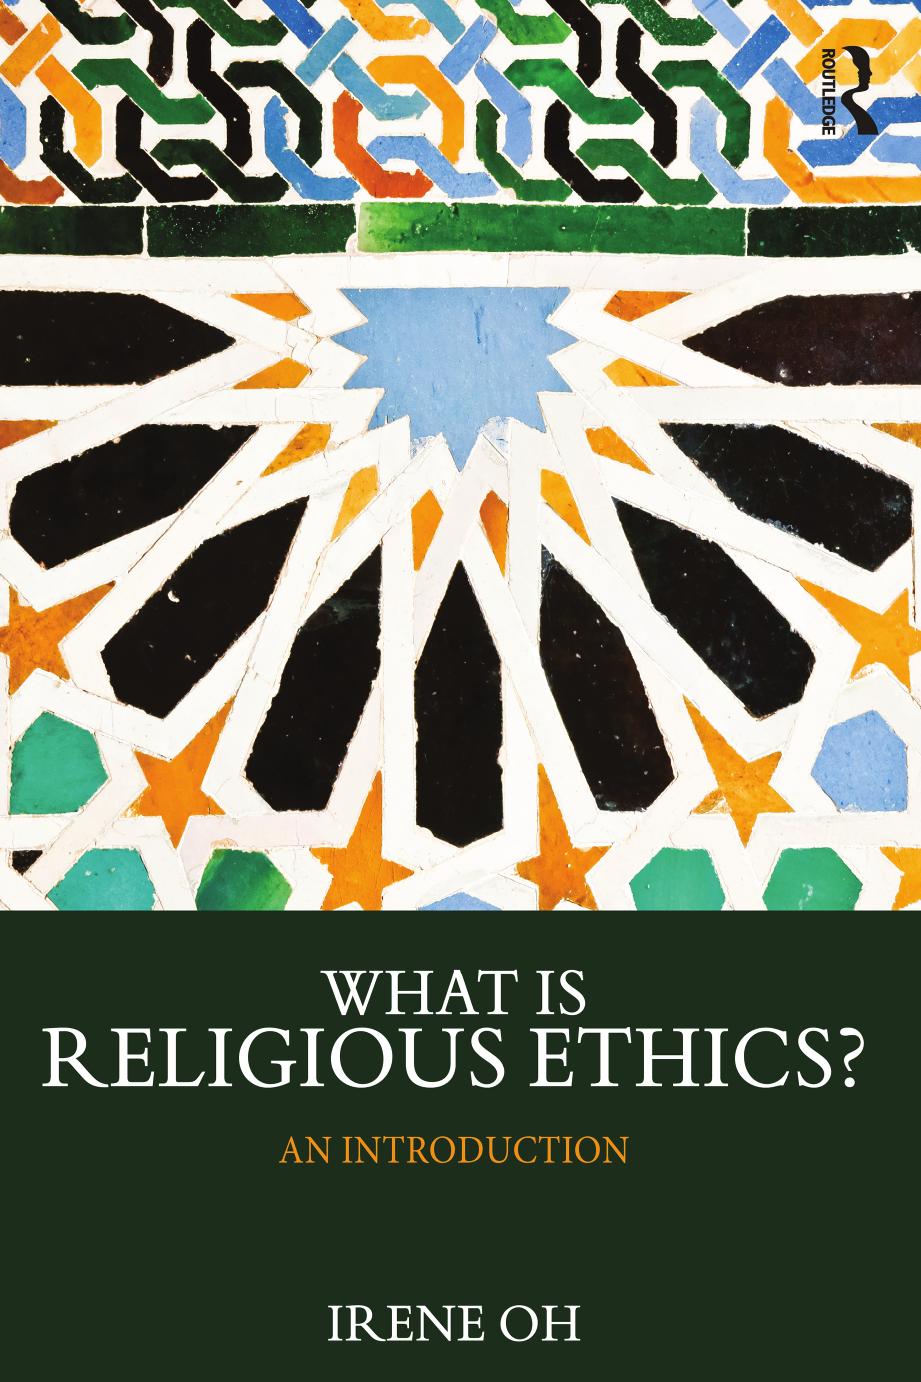 What is Religious Ethics?: An Introduction by Irene Oh